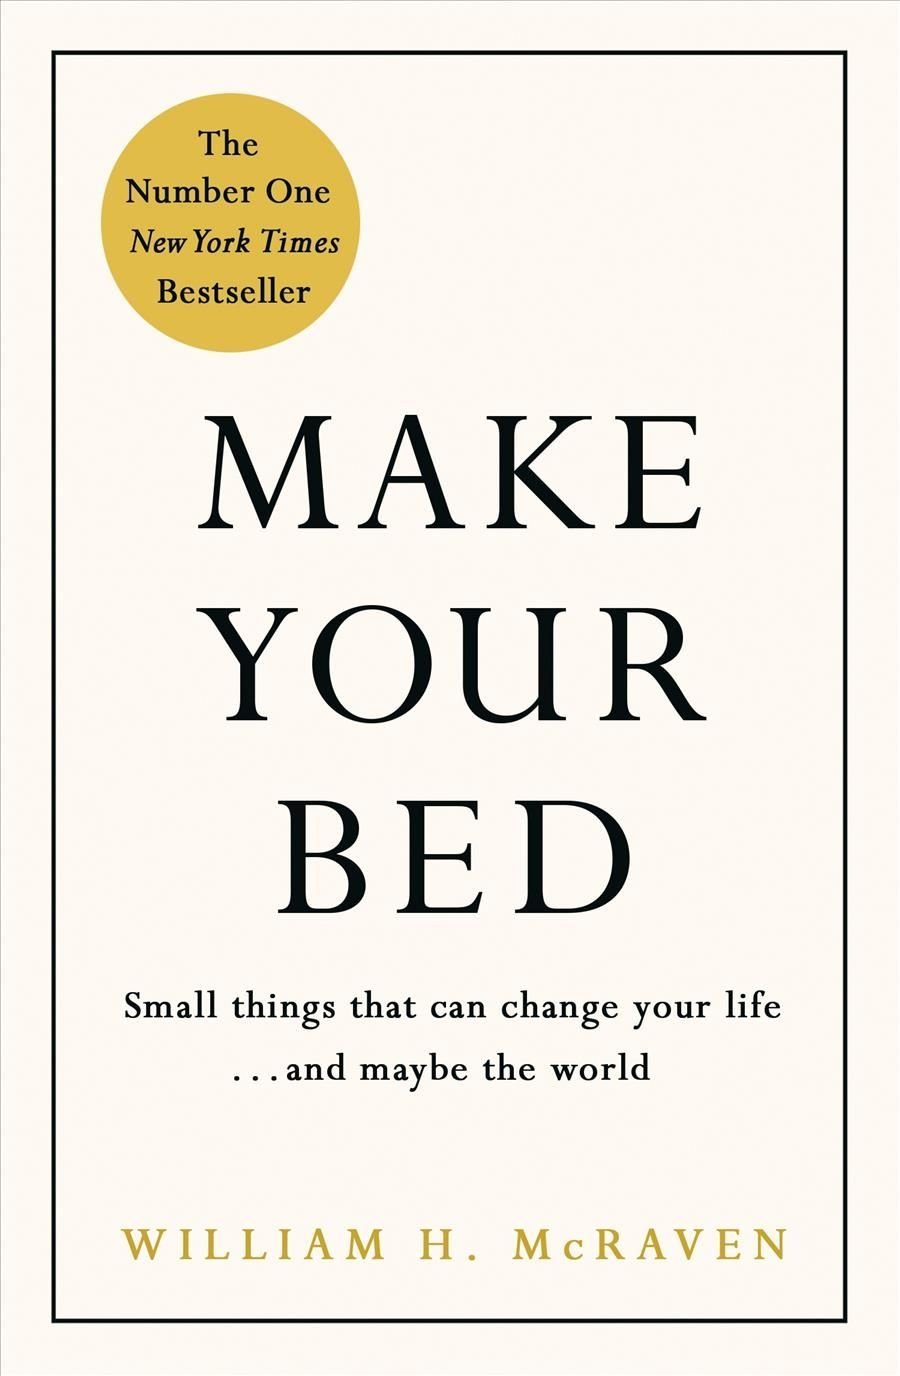 william h mcraven make your bed a daily journal